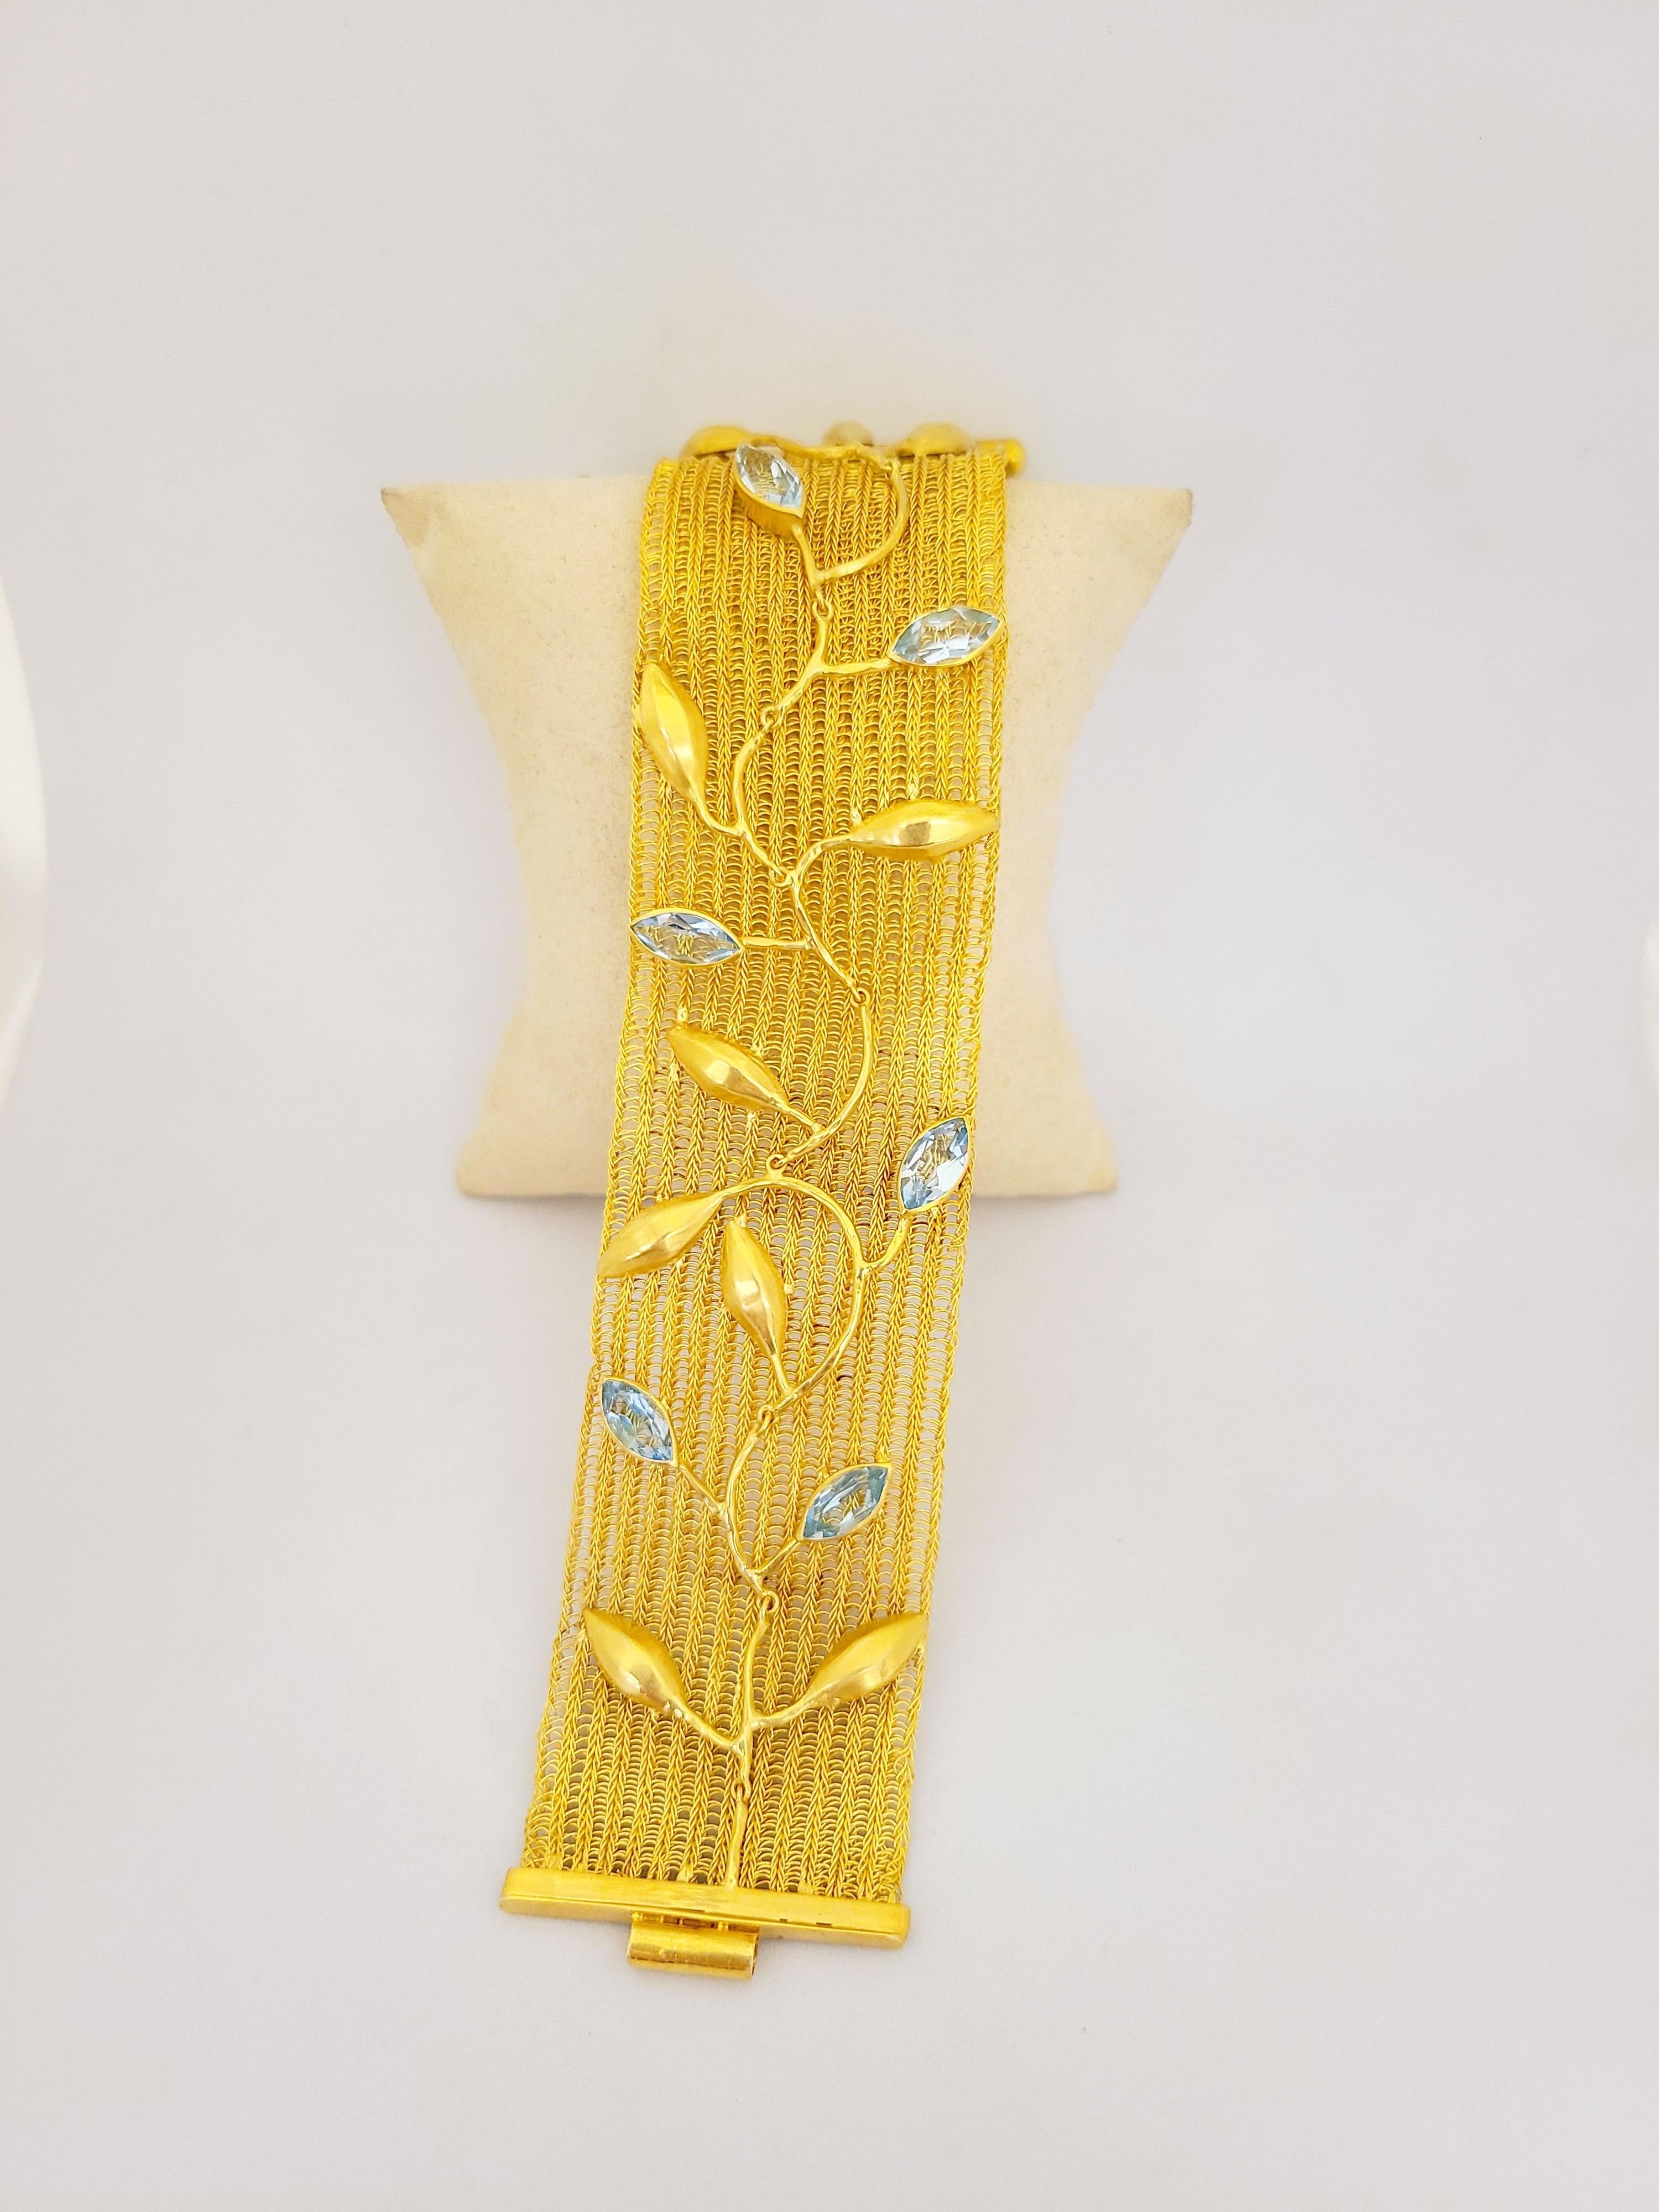 This Beautiful bracelet is composed of hand-woven 18Kt yellow gold and accented with 7 Carats of marquis cut blue topaz, and satin finished gold leaves. The piece is timeless and feminine. 
Bracelet measures 7